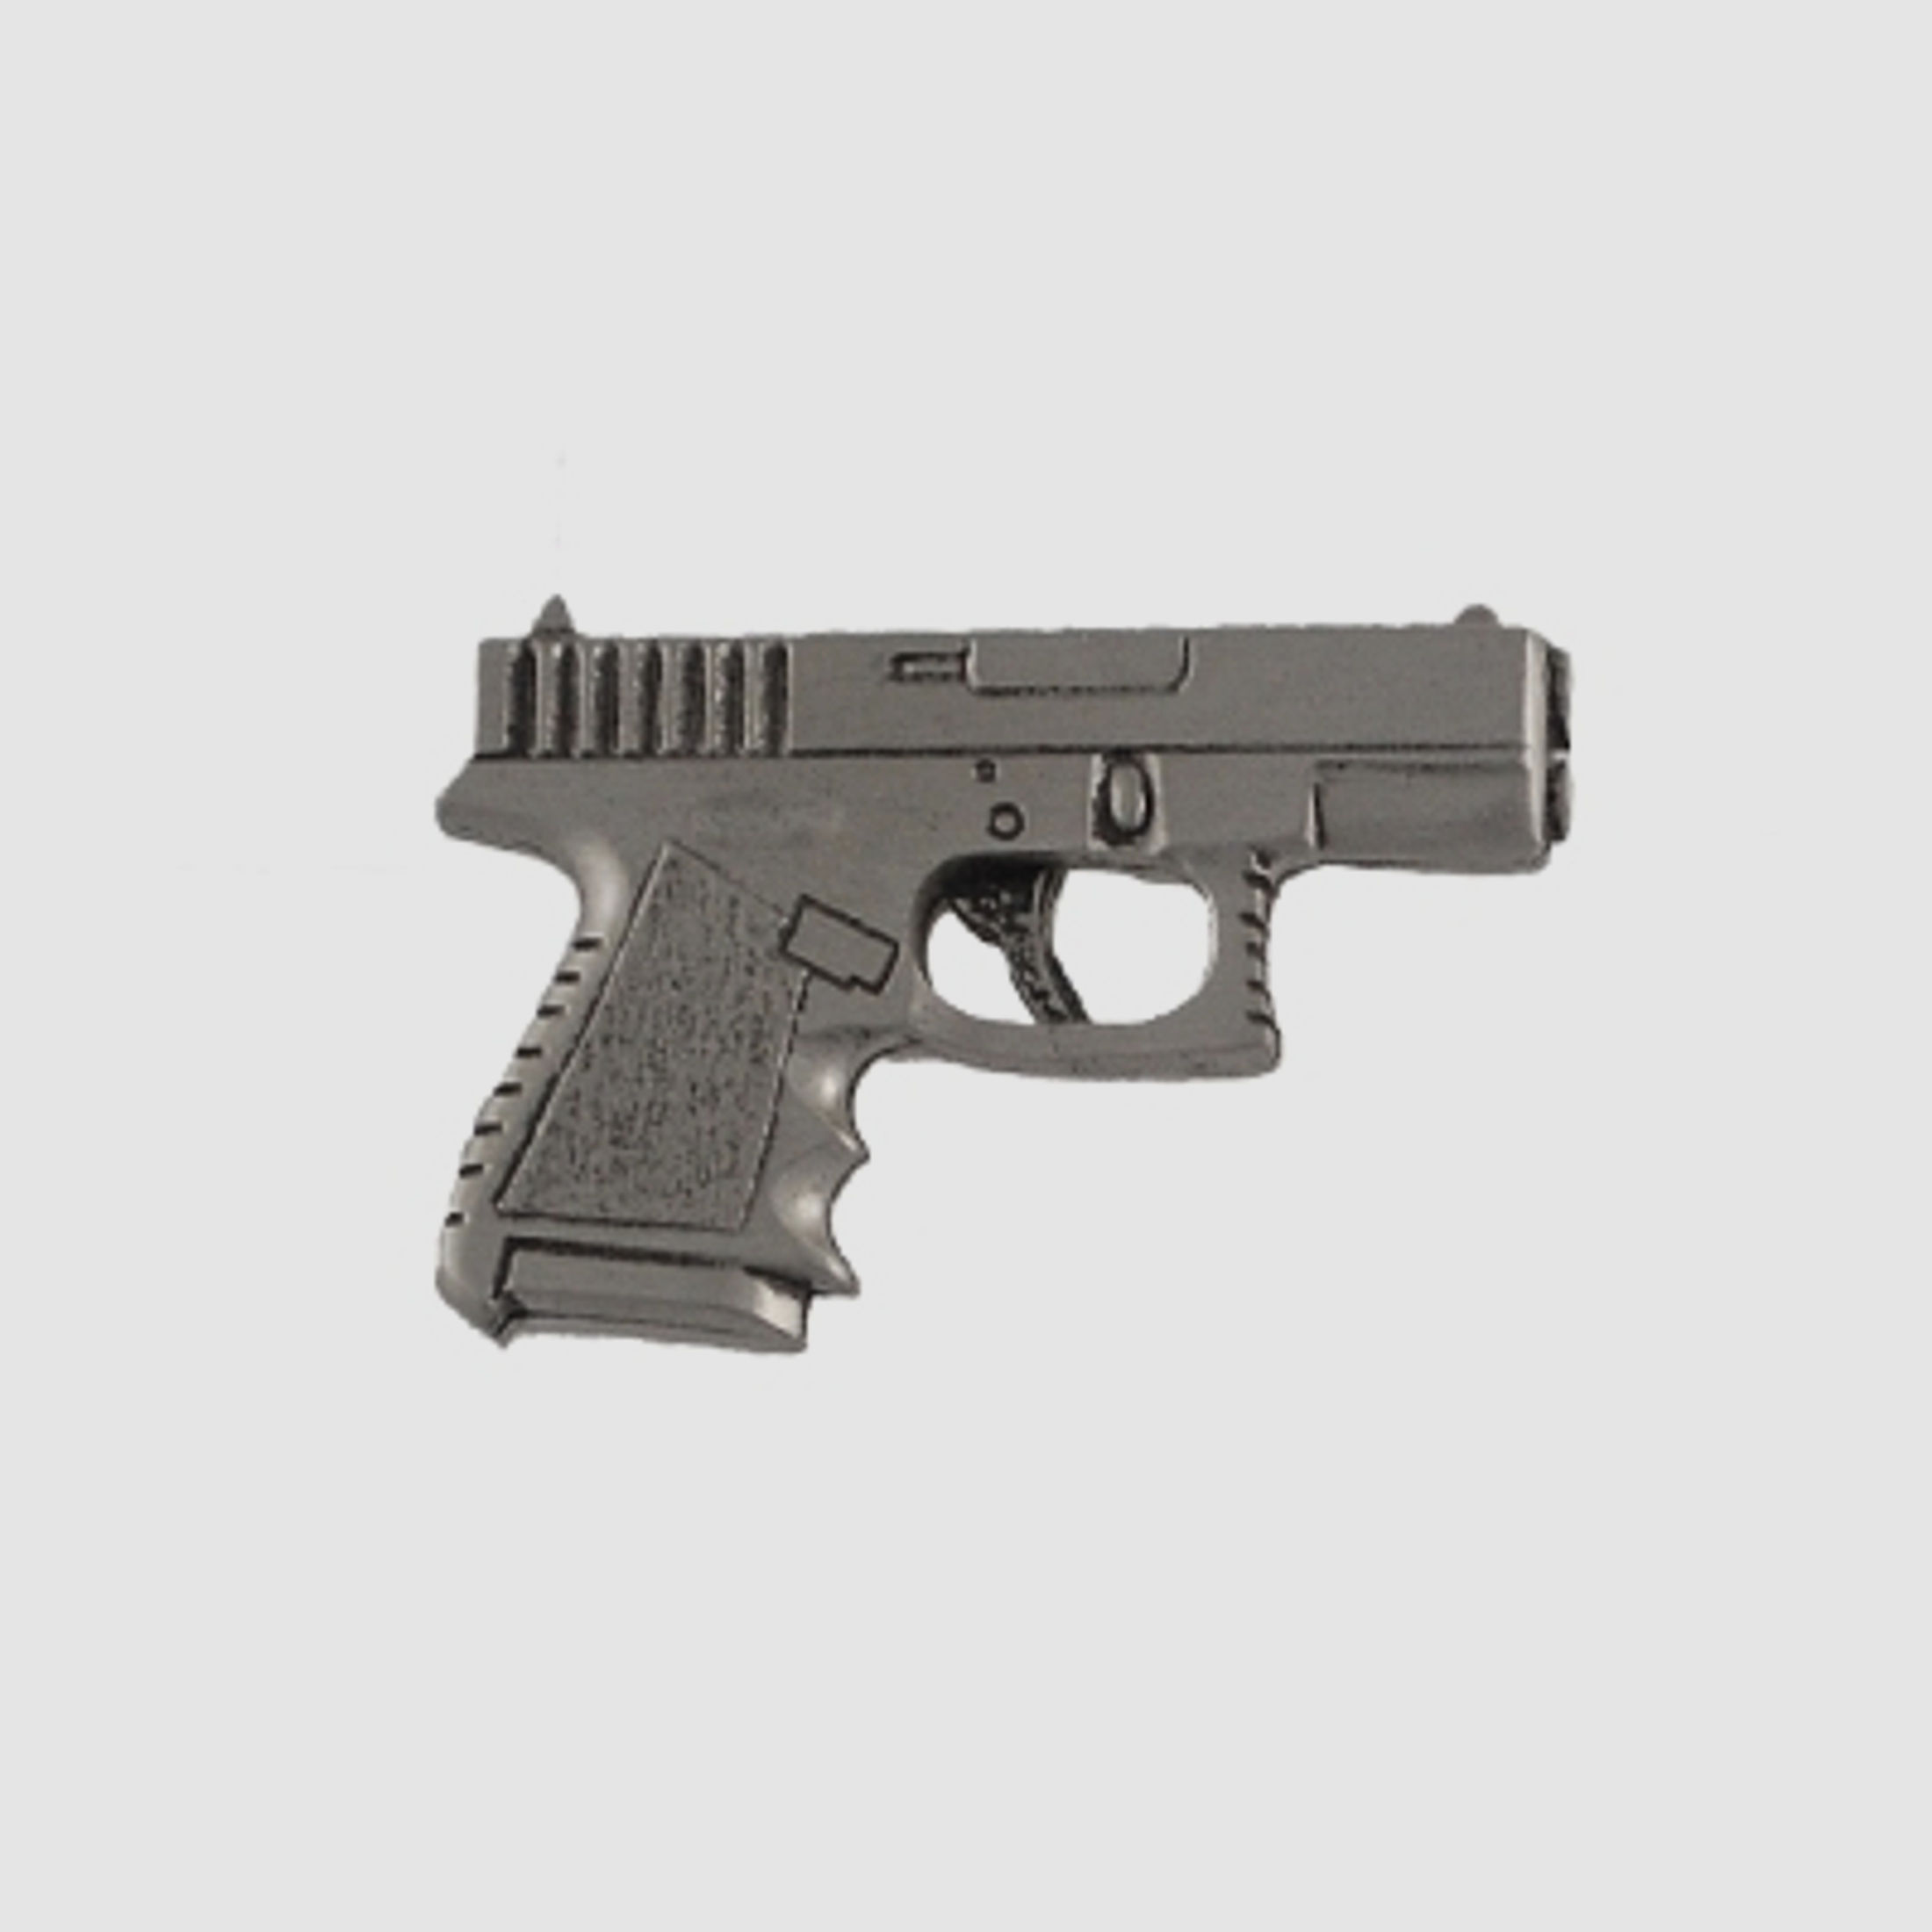 Empire Pewter Anstecker Glock Compact